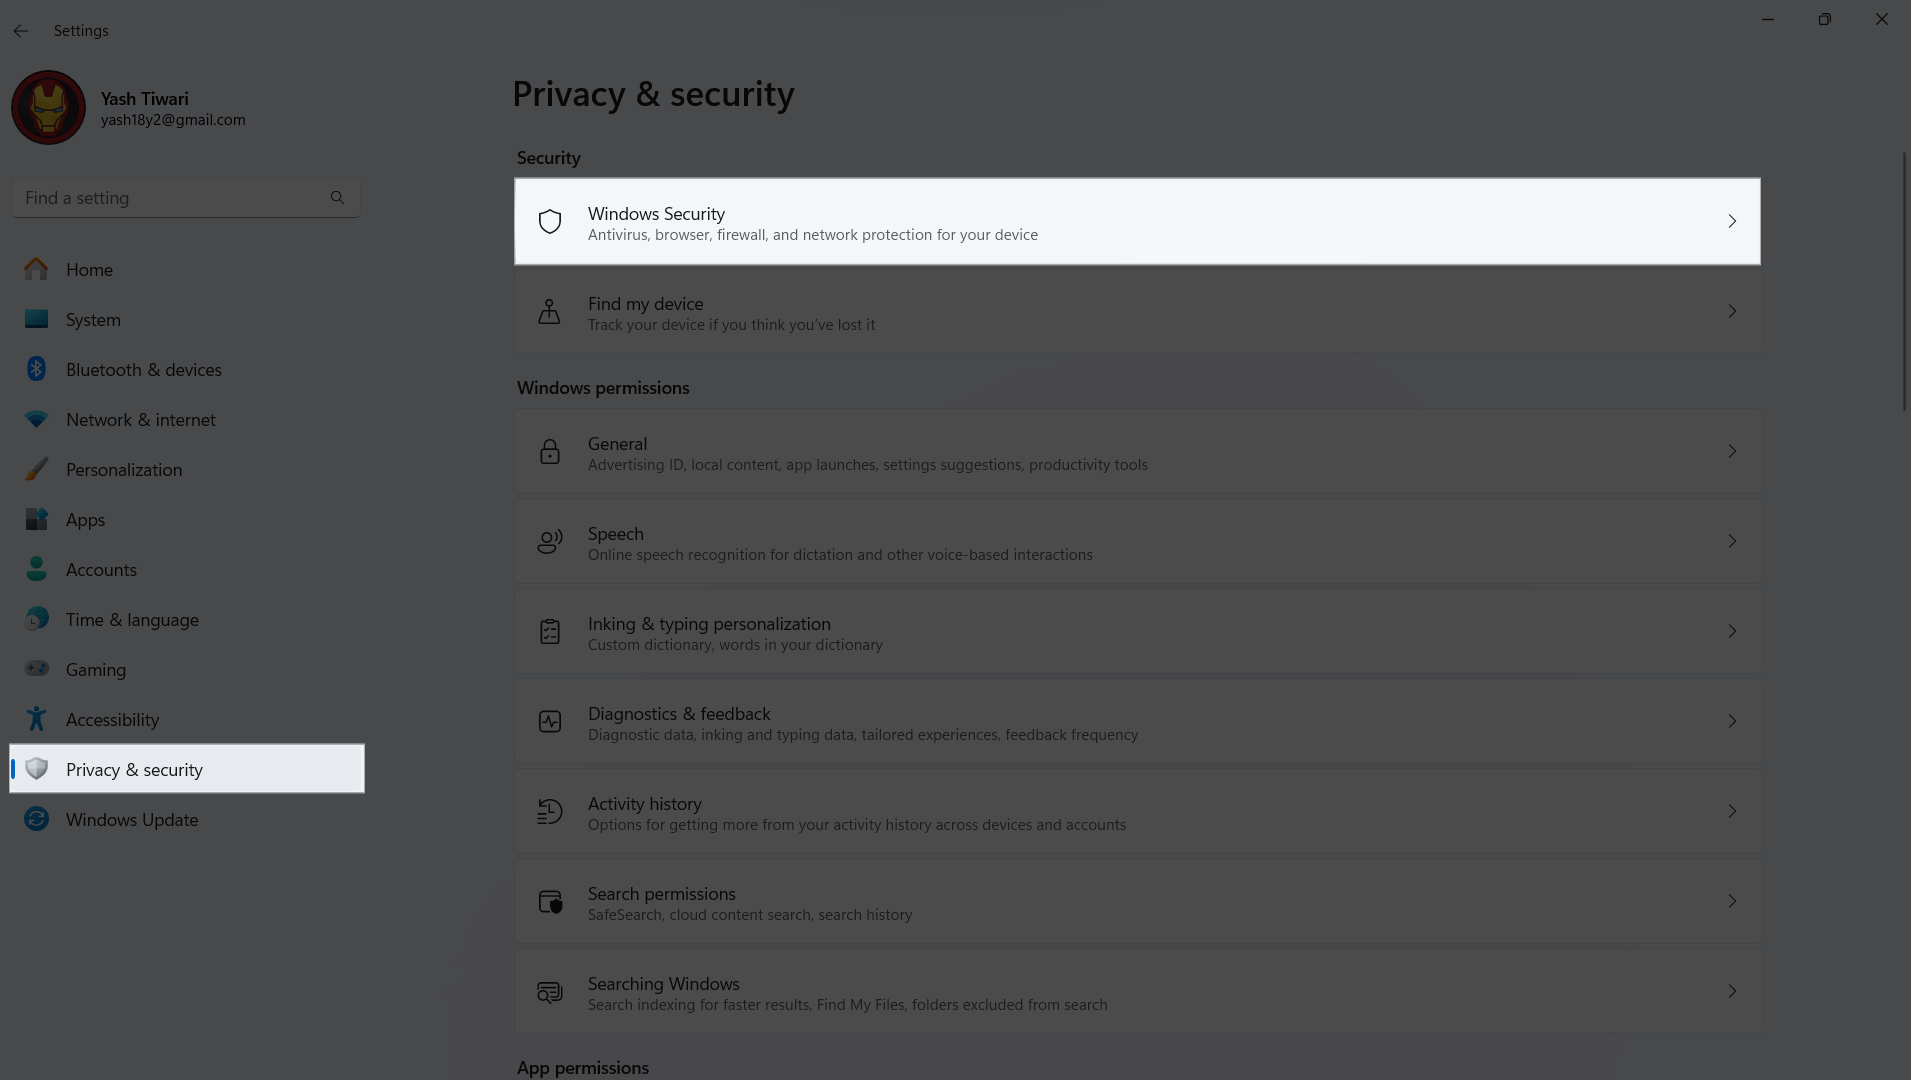 Privacy & security → Windows Security